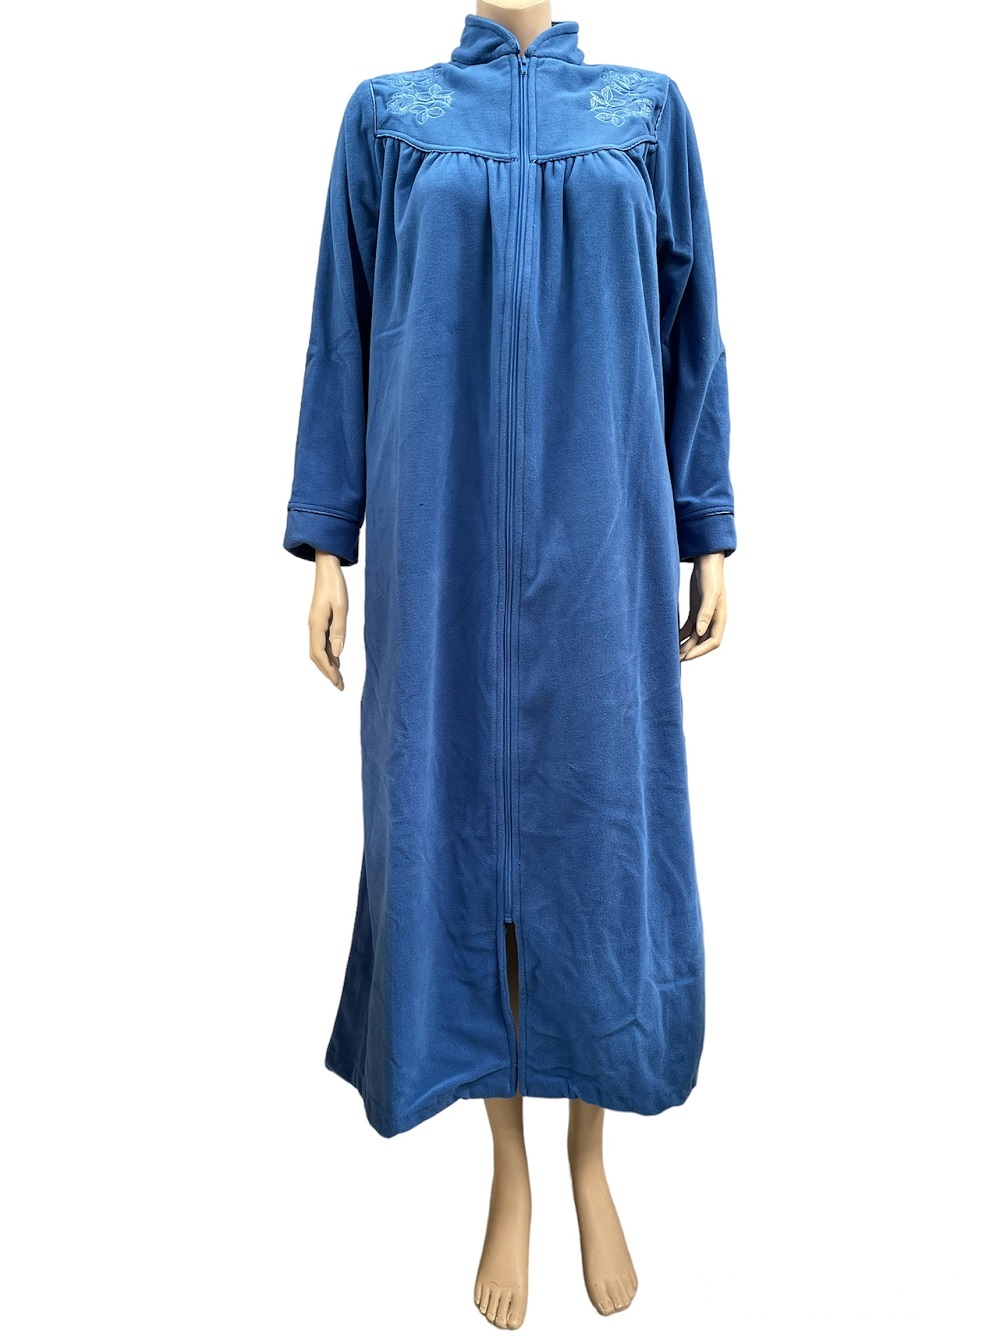 Ladies Givoni Blue Admiral Long Length Zip Dressing Gown Bath Robe (82)